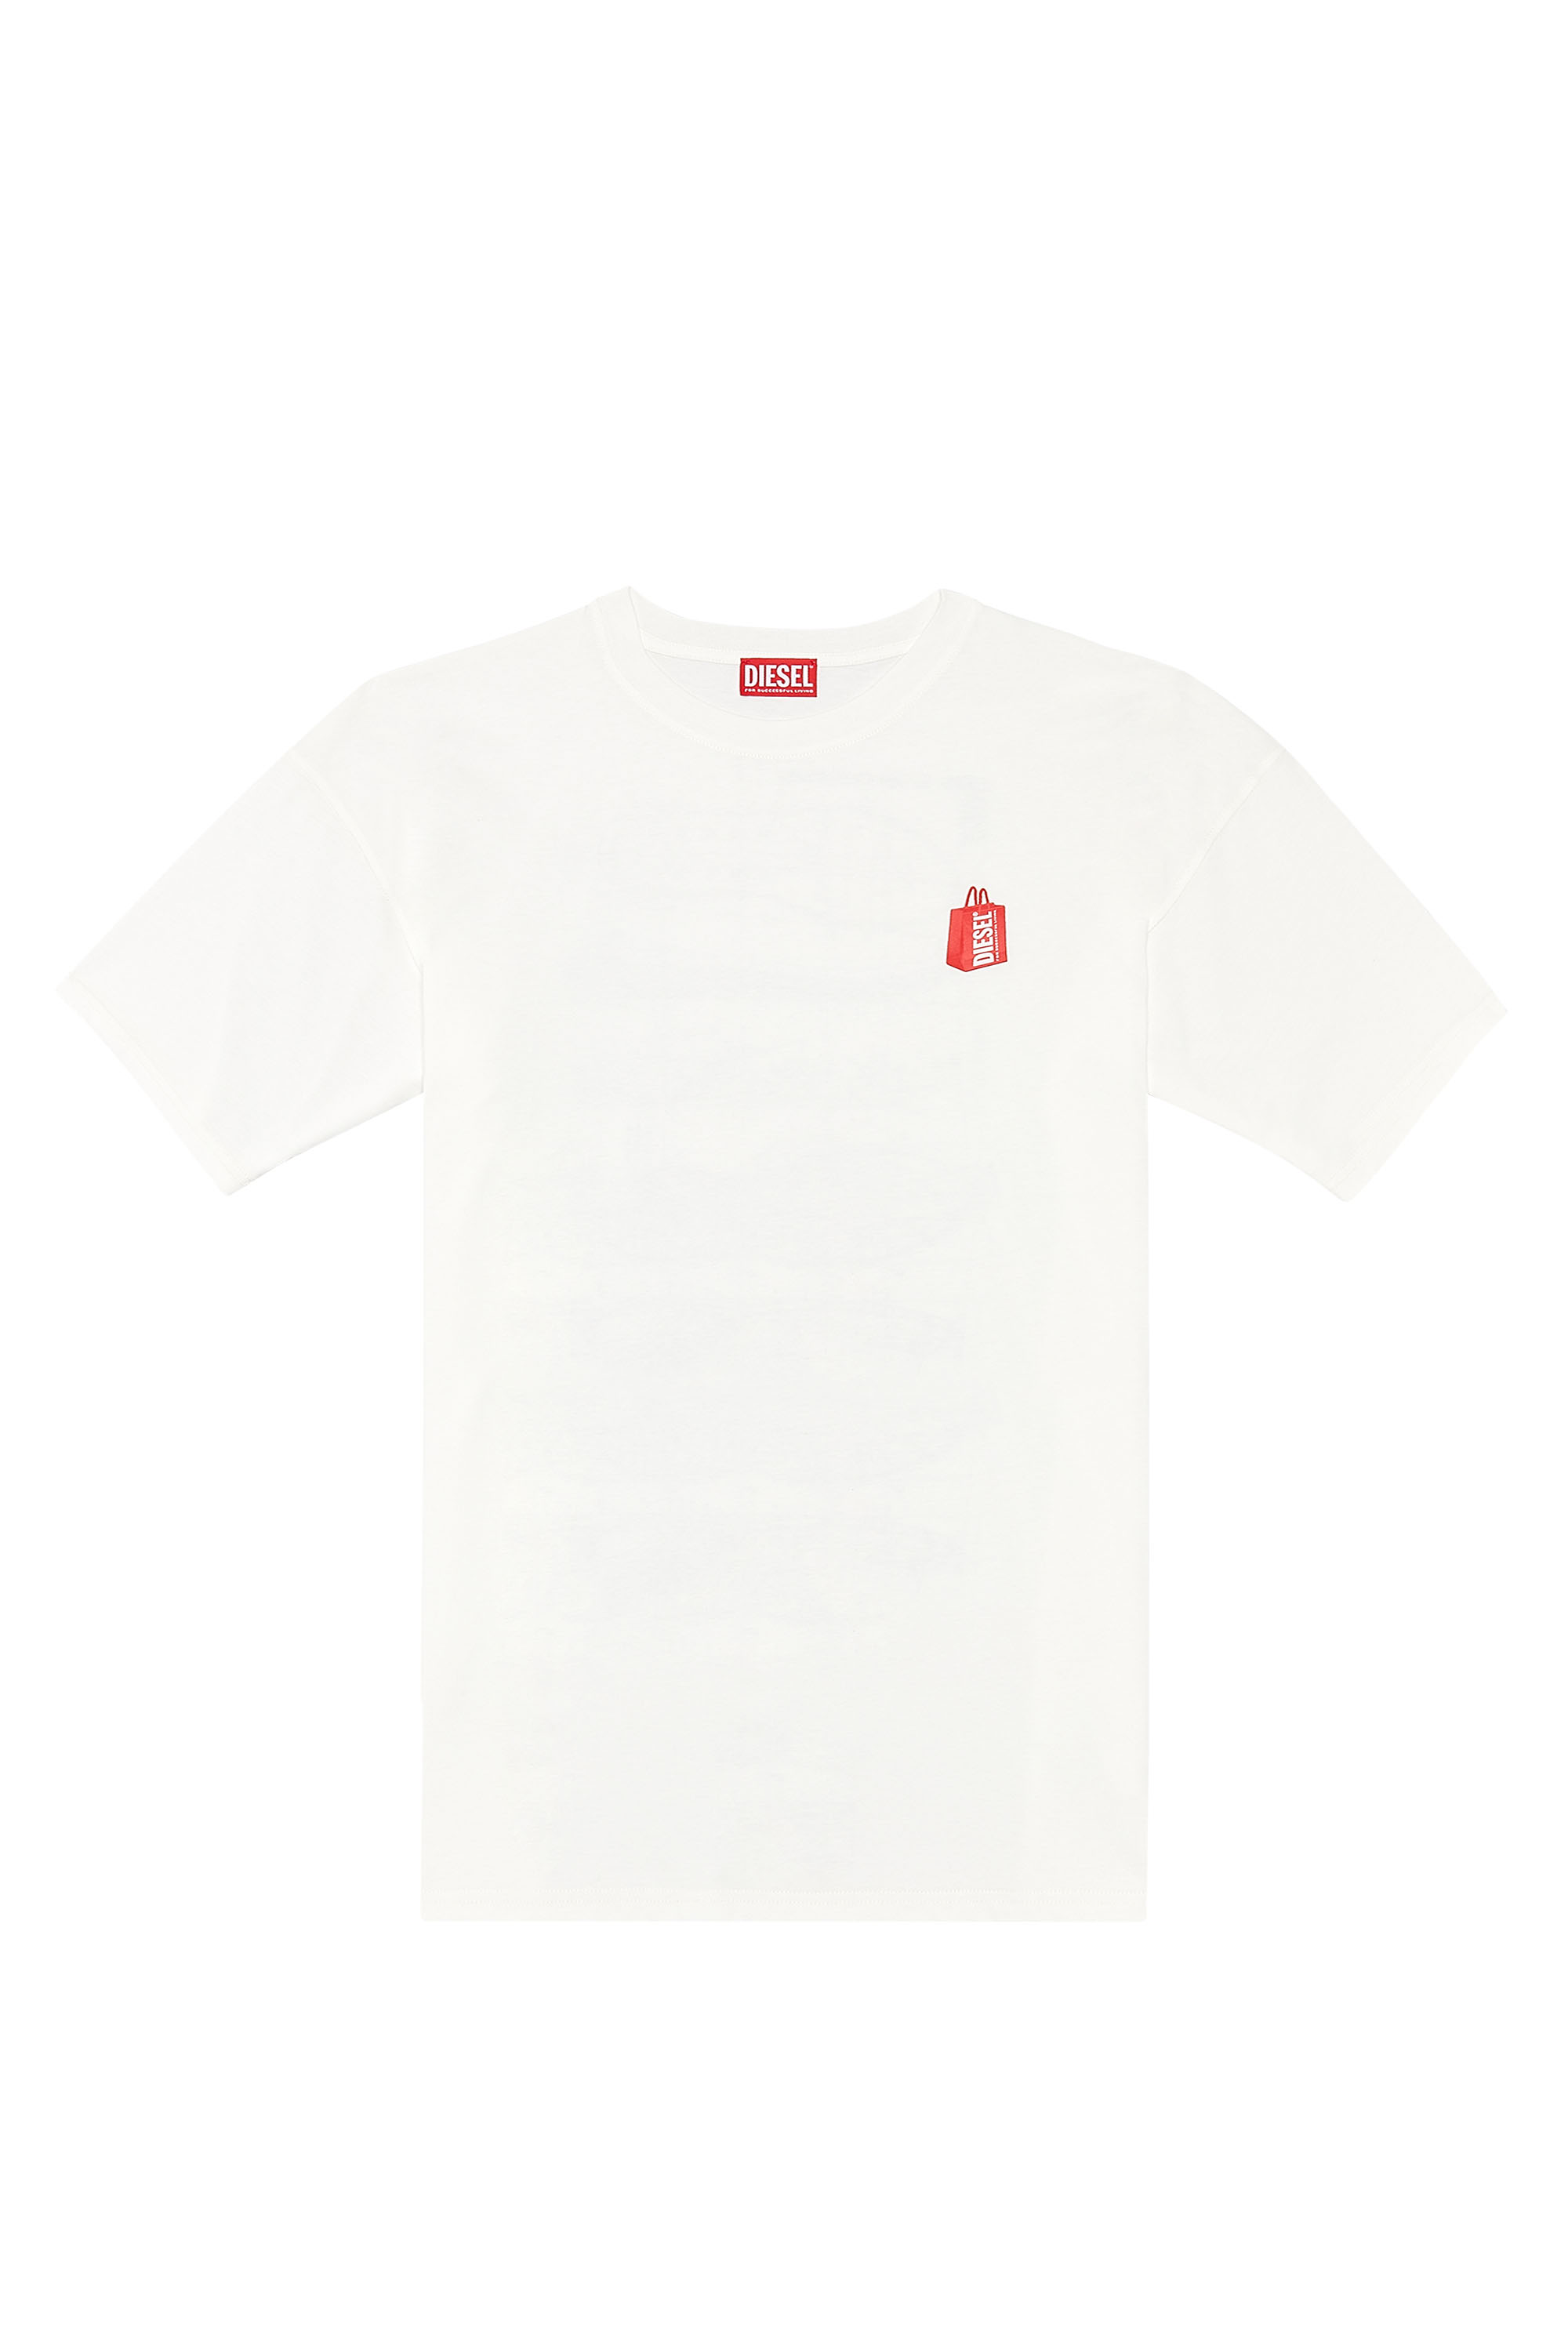 Diesel - T-BOXT-N2, Man T-shirt with Prototype sneaker print in White - Image 3